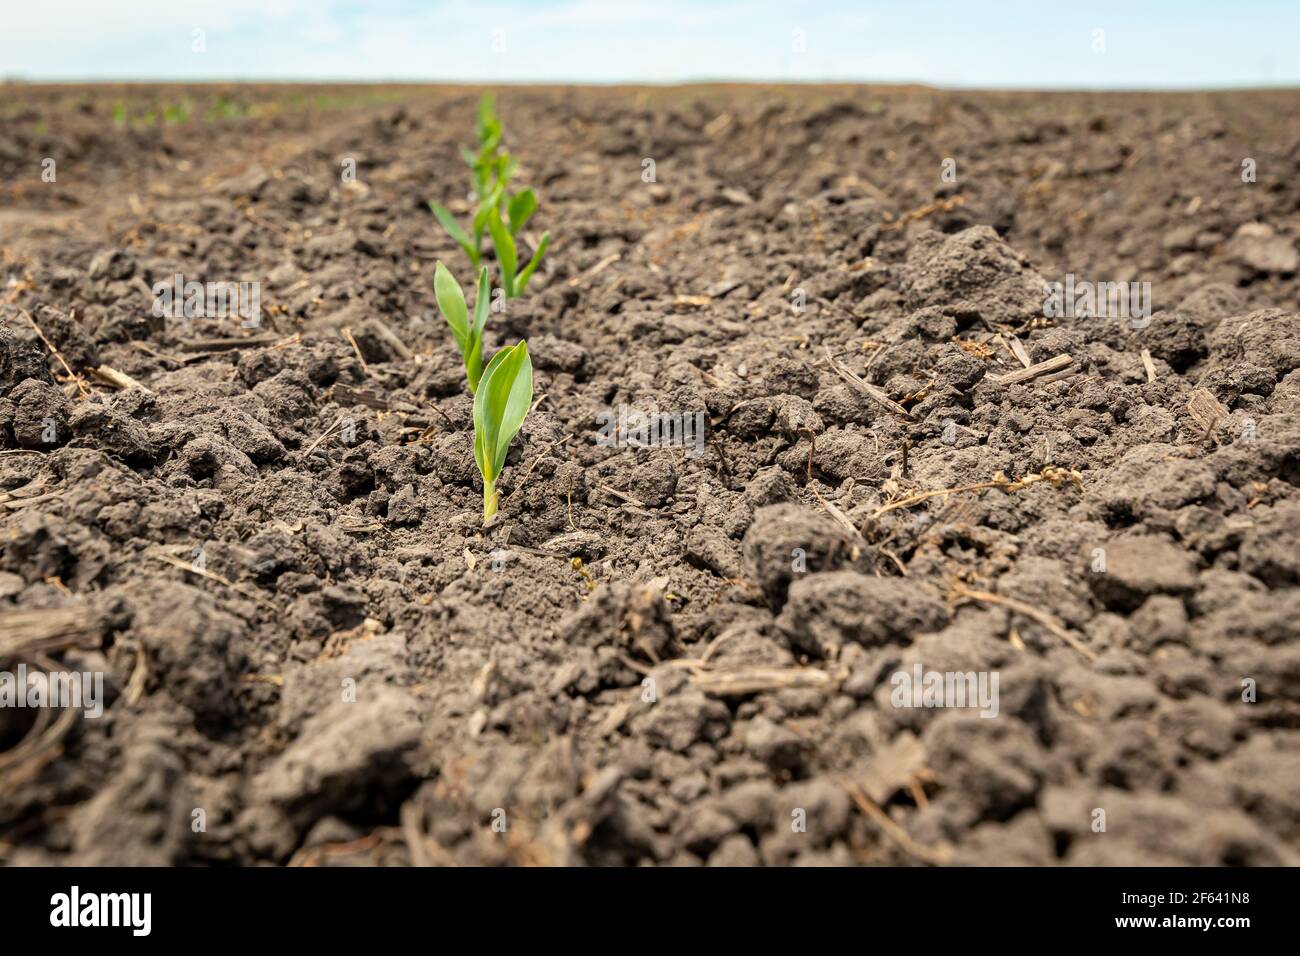 Corn plant emerging out of soil. VE growth stage. Concept of farming, agriculture and planting season Stock Photo